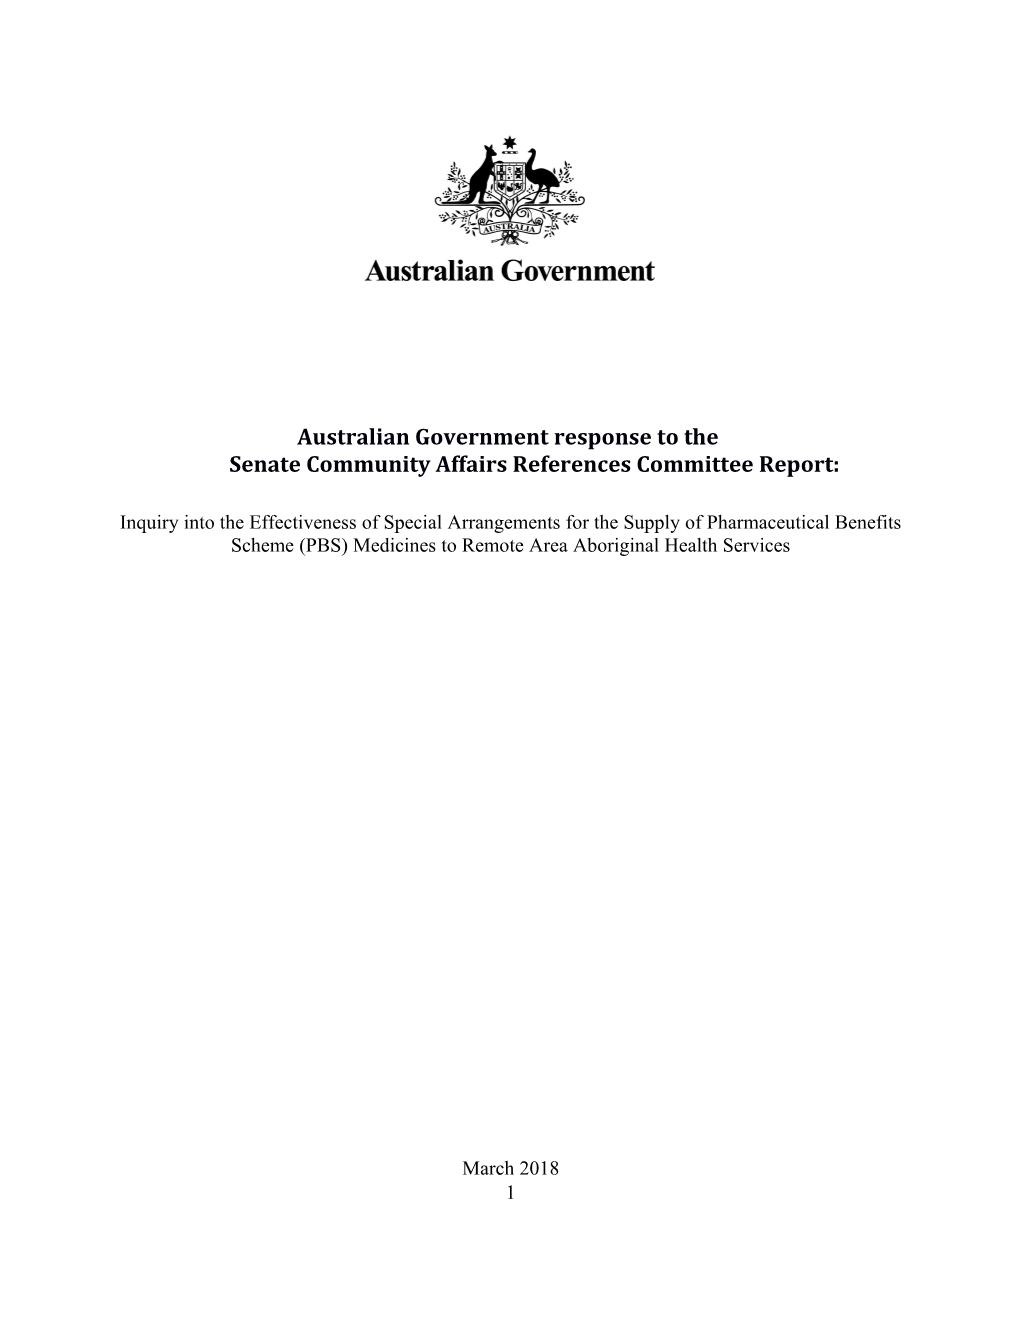 Australian Government Response to Thesenate Community Affairs References Committee Report